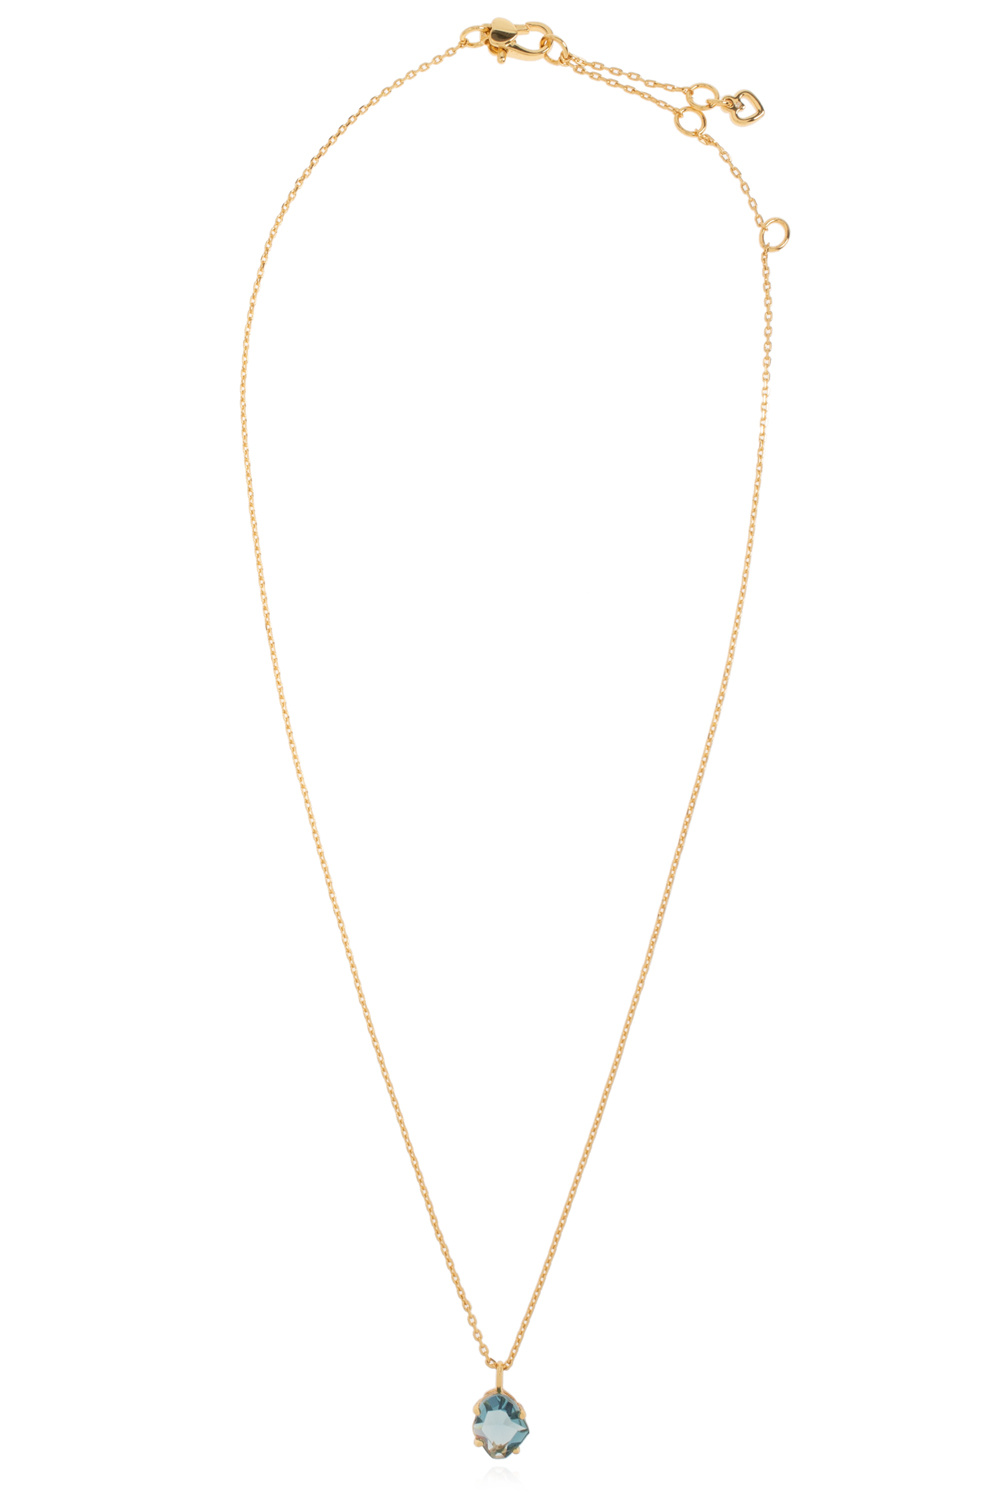 Kate Spade Charm necklace